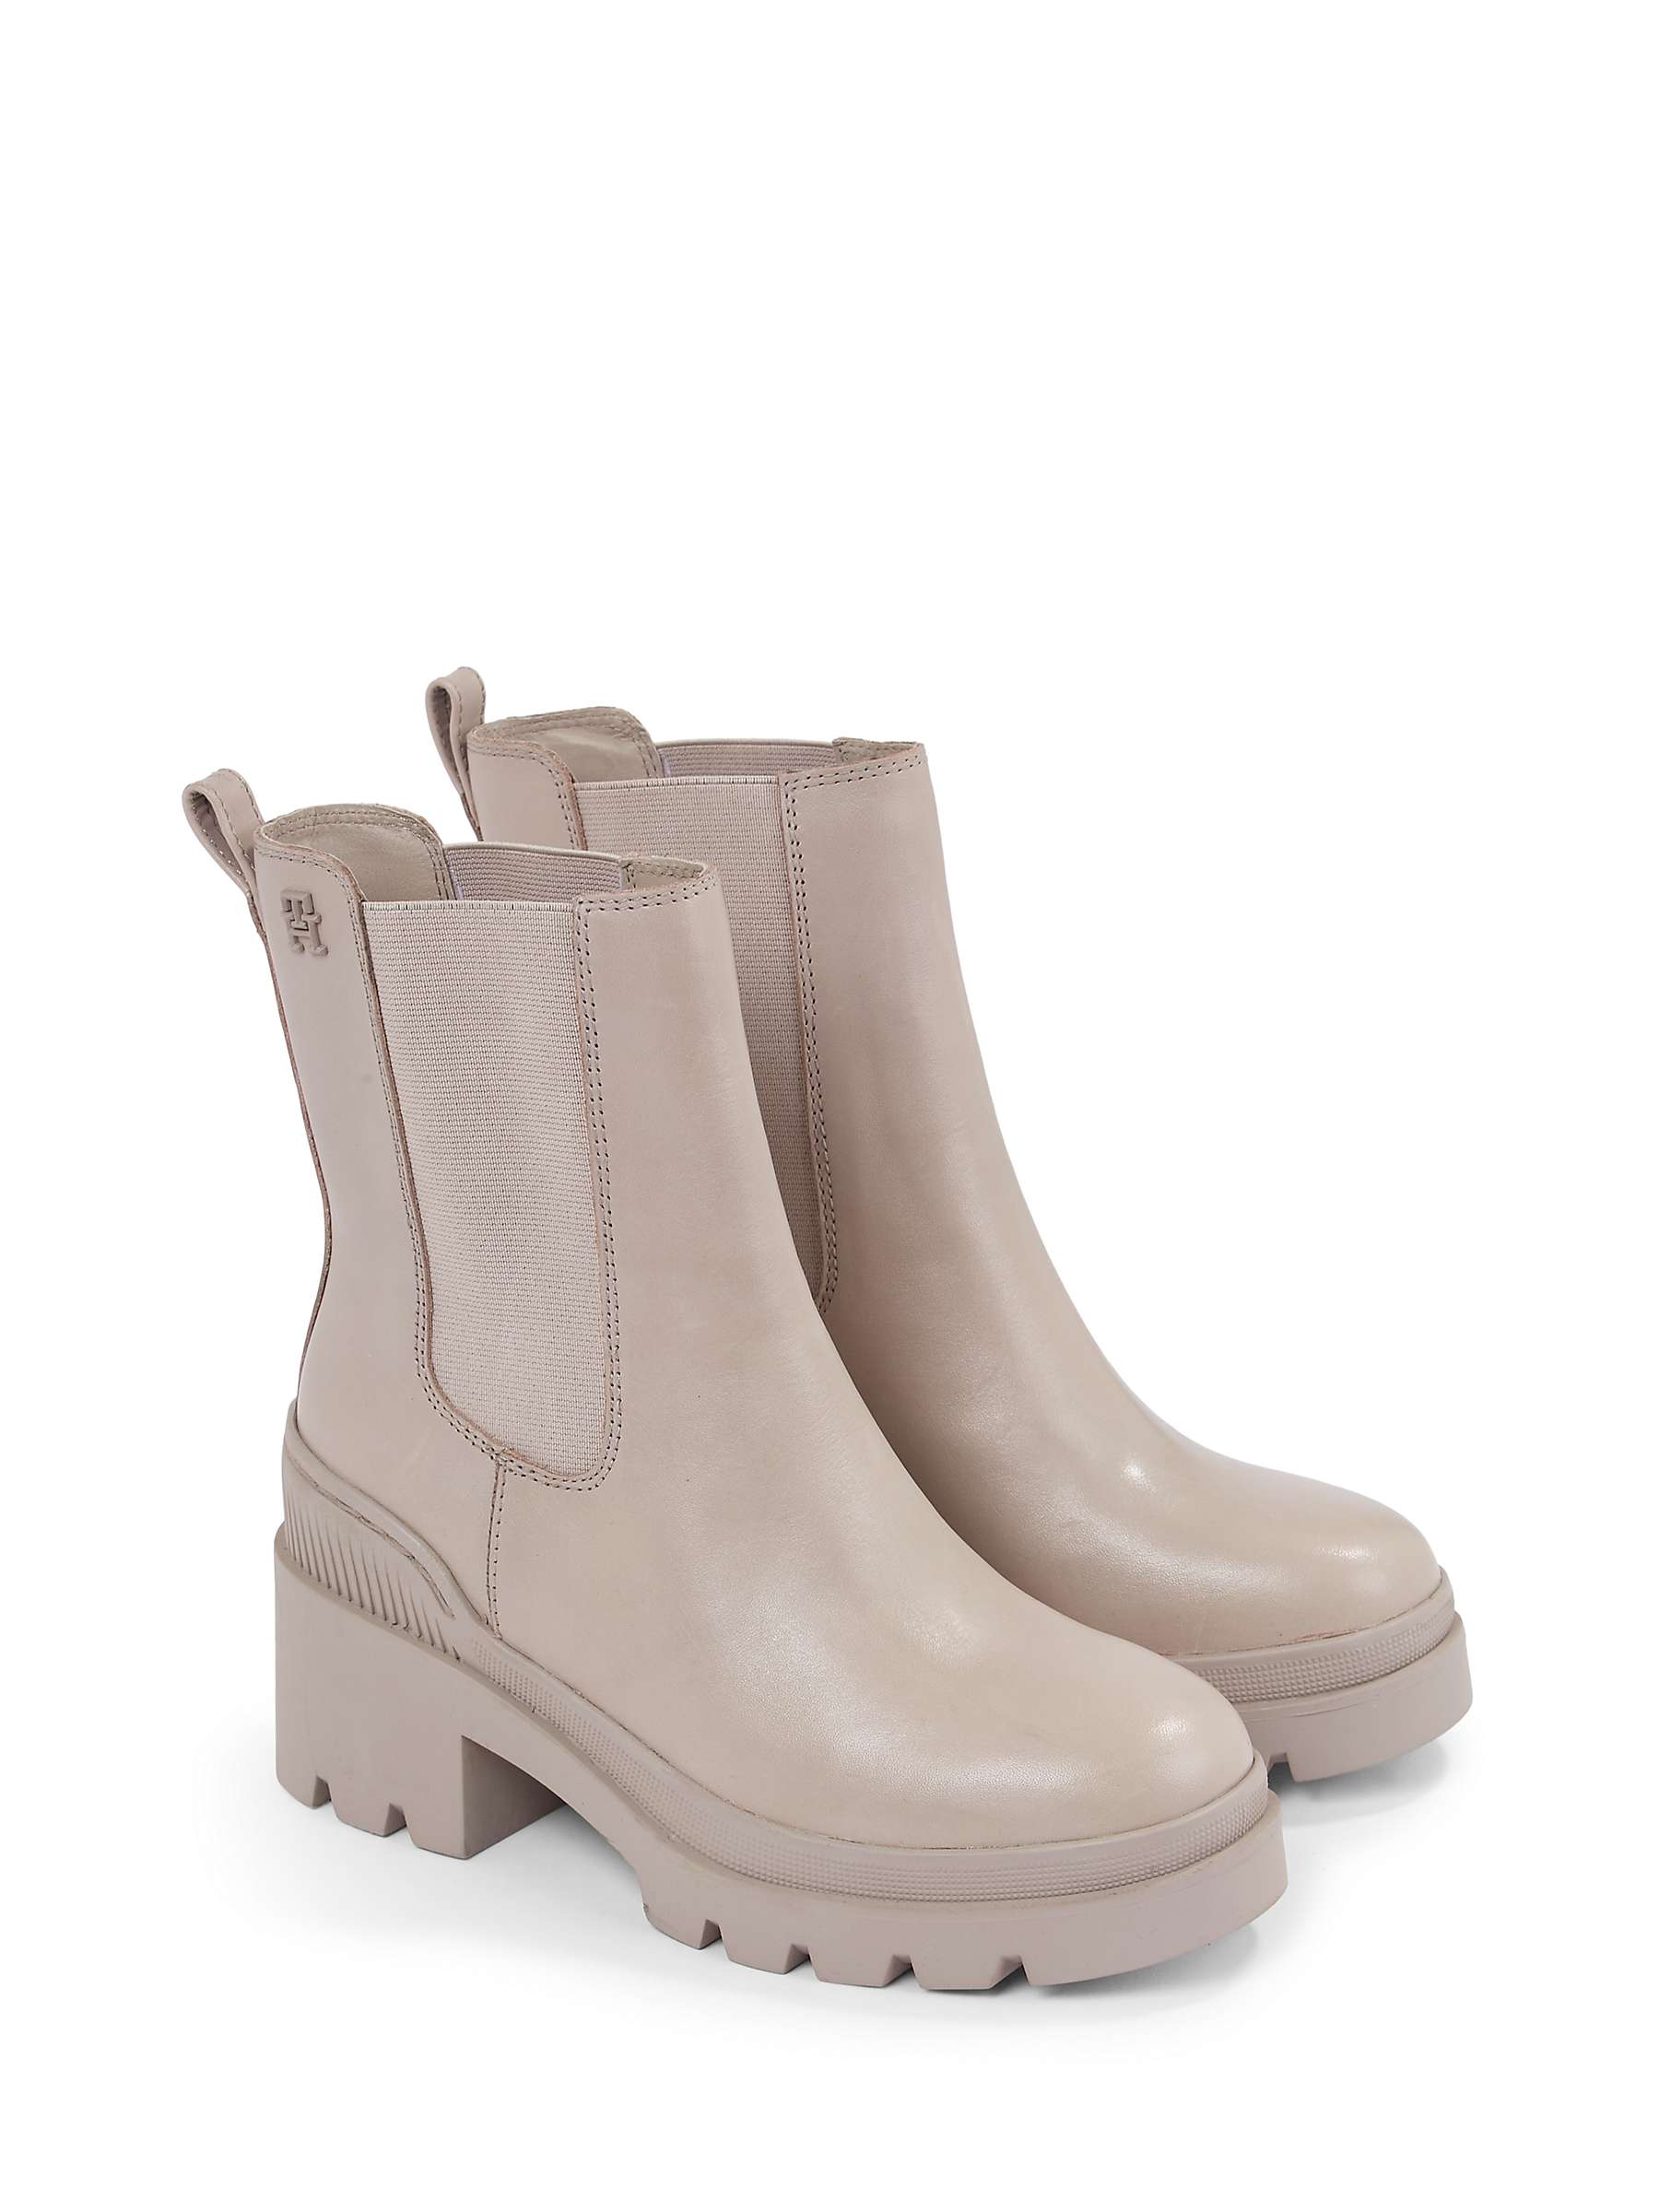 Buy Tommy Hilfiger Block Heel Leather Chelsea Boots, Smooth Taupe Online at johnlewis.com